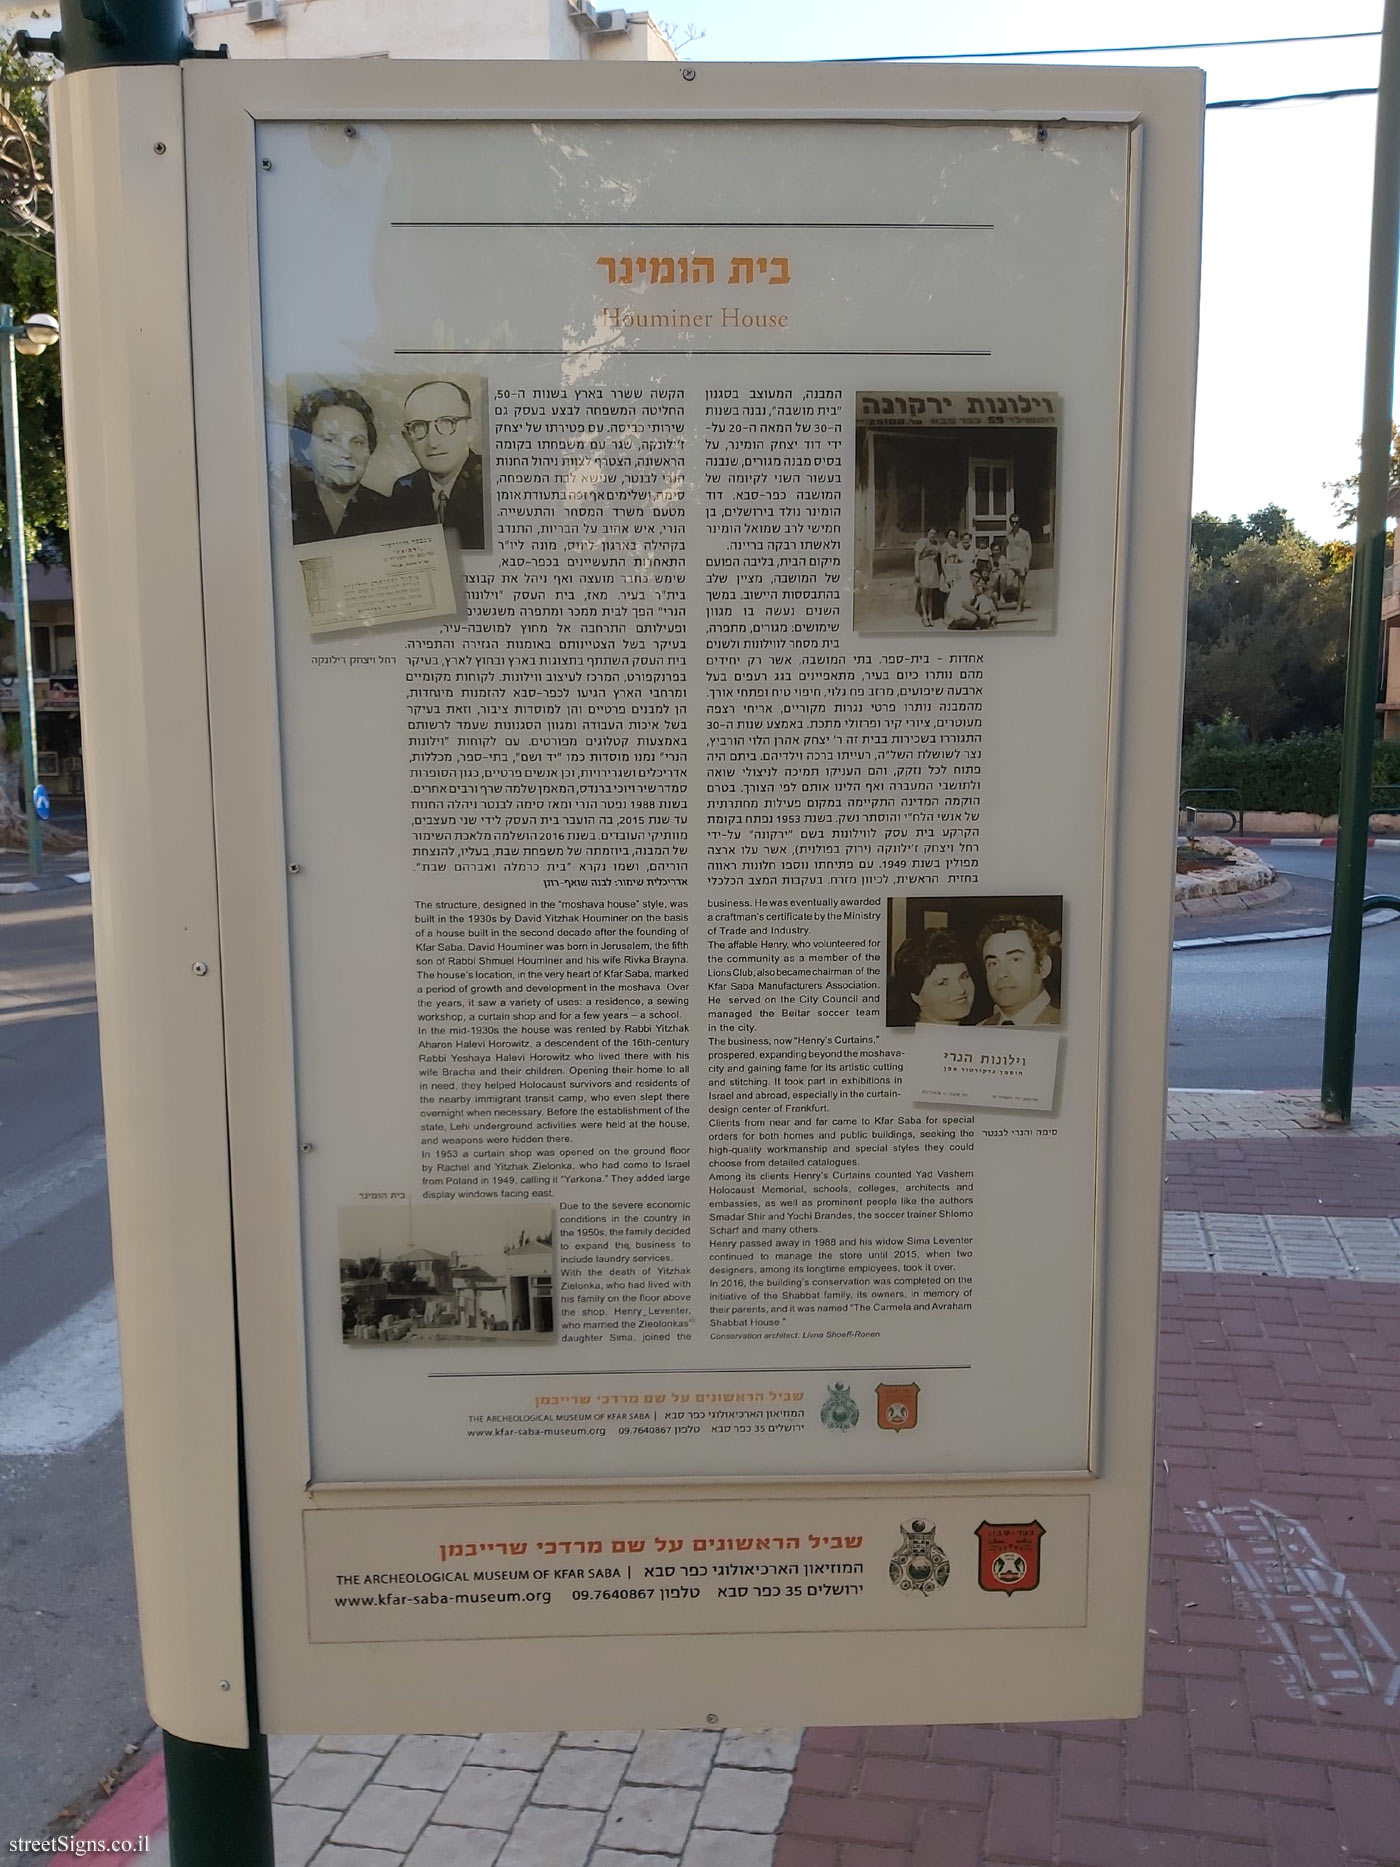 Kfar Saba - The Founders’ Path - Station 14 - Houminer House (the other side)